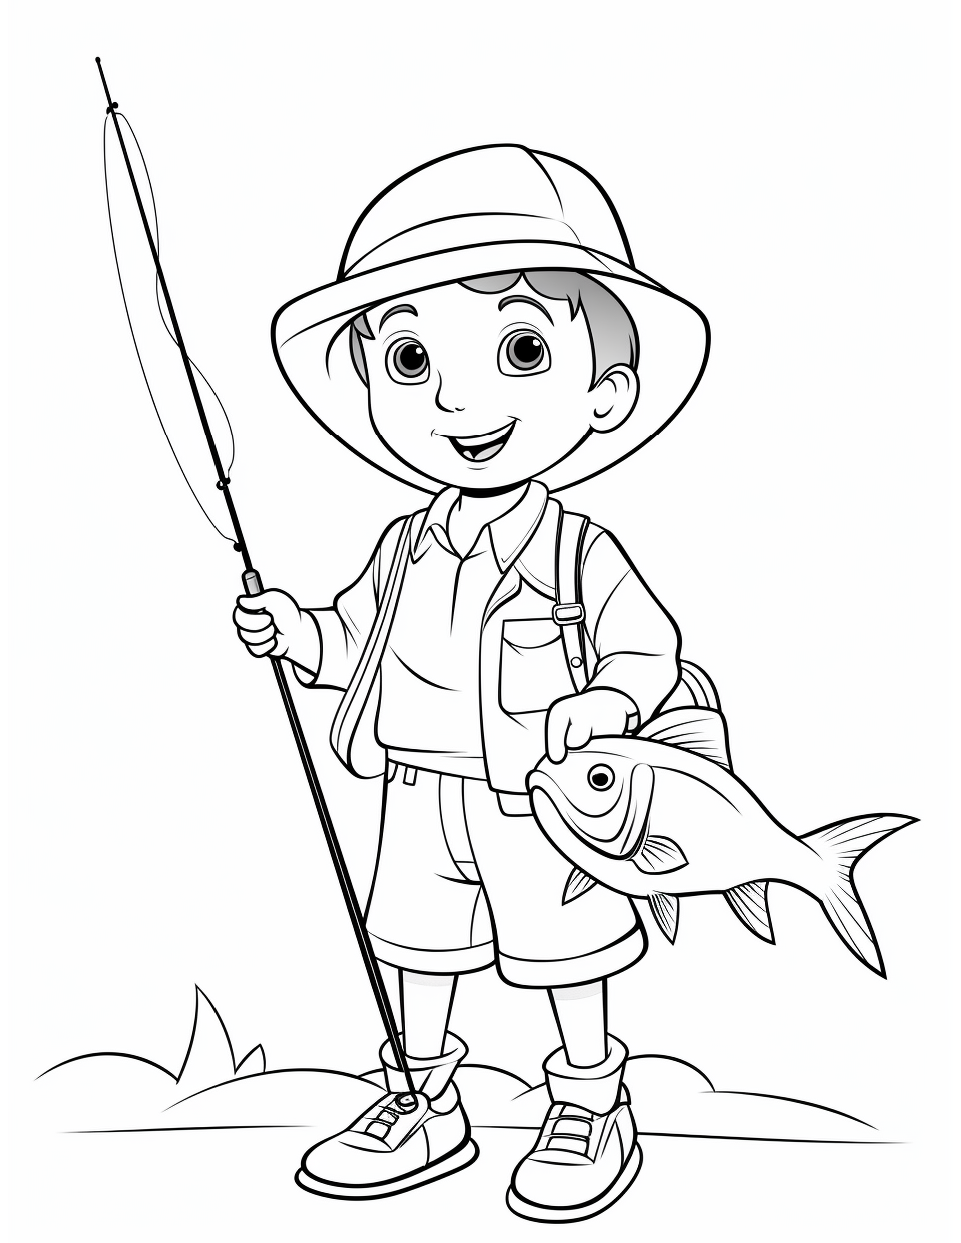 Fishing Coloring Page 9 - Line drawing of a boy with a big fish